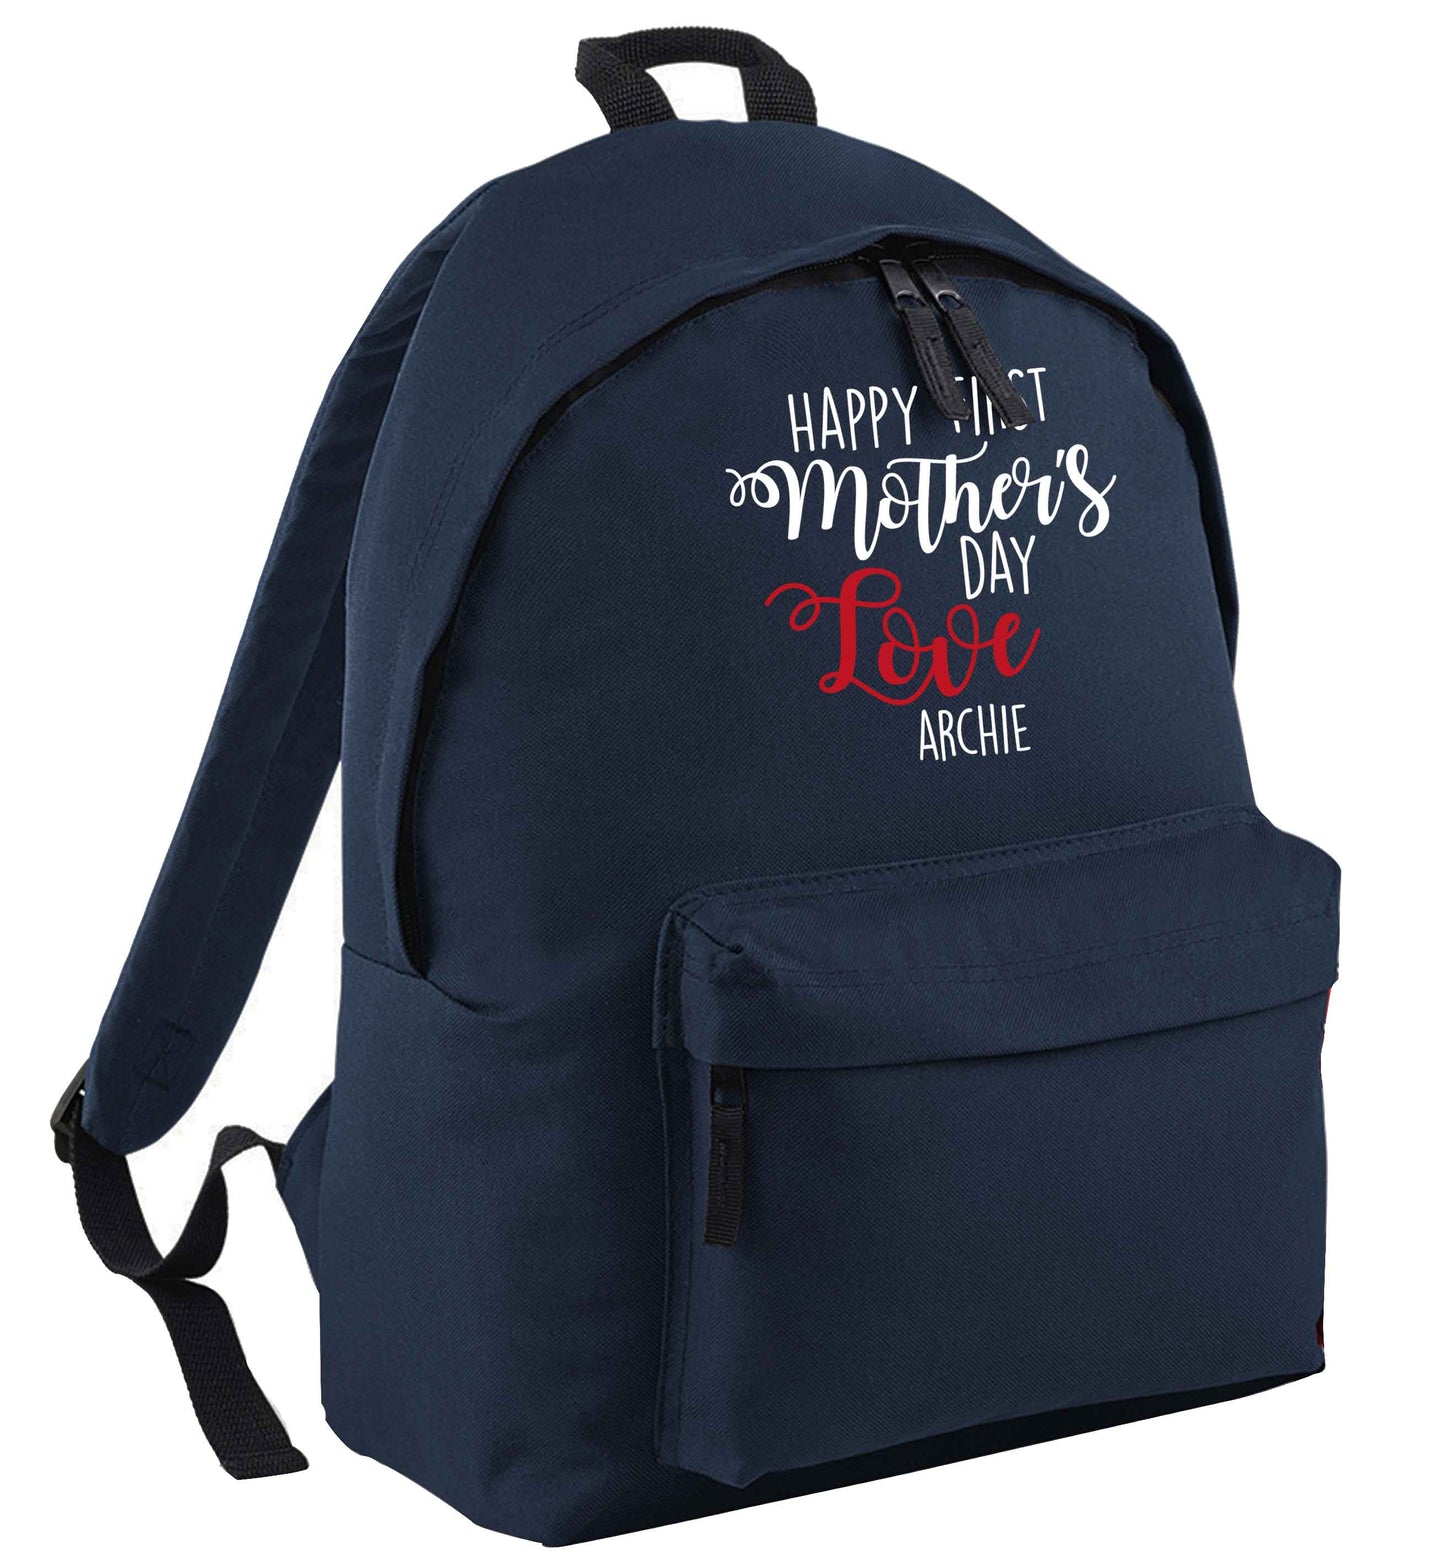 Mummy's first mother's day! navy childrens backpack